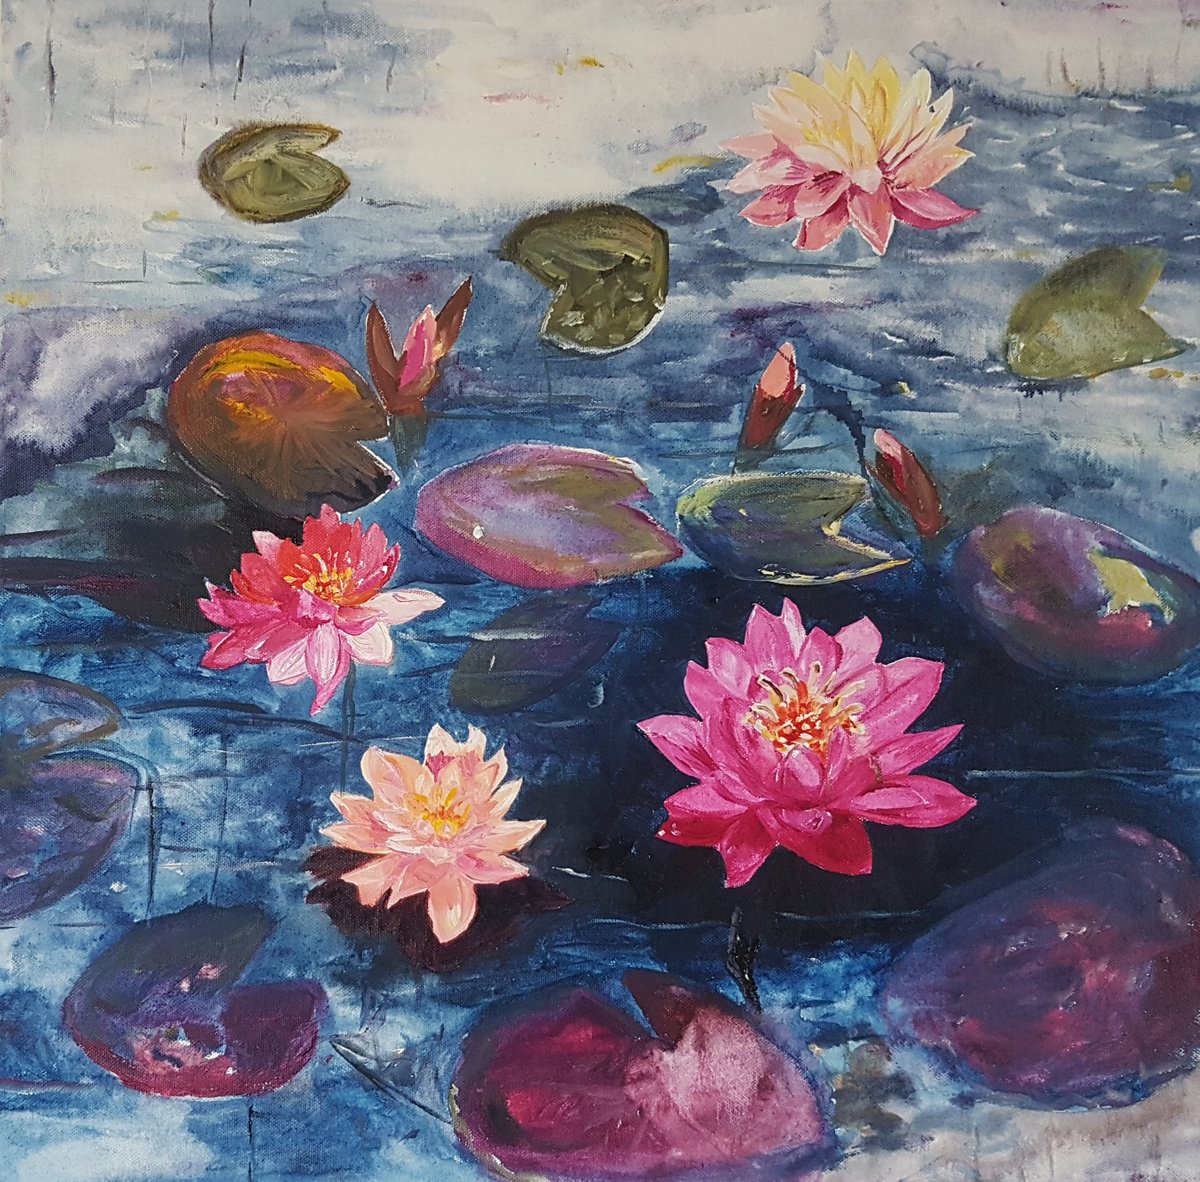 Water lilies: Like jewels on the water by Kathrin Floge